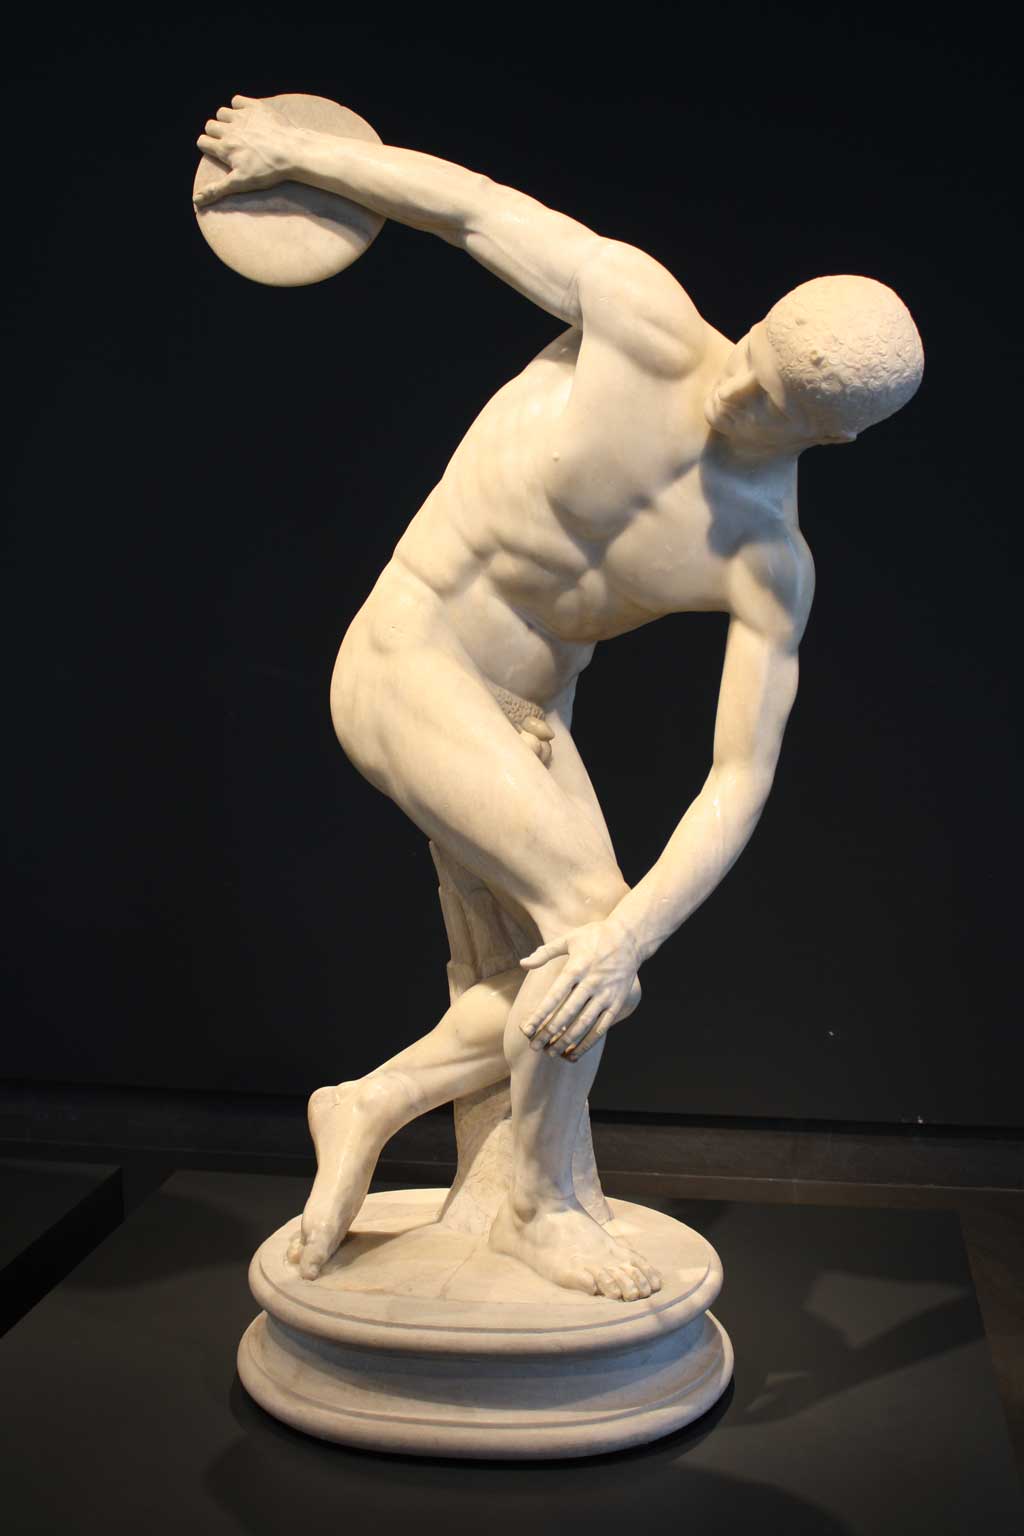 Image of the Discus Thrower. A marble replica of the original, the statue depicts a stoic-faced athlete in mid-rotation as he prepares to hurl the discus aloft.